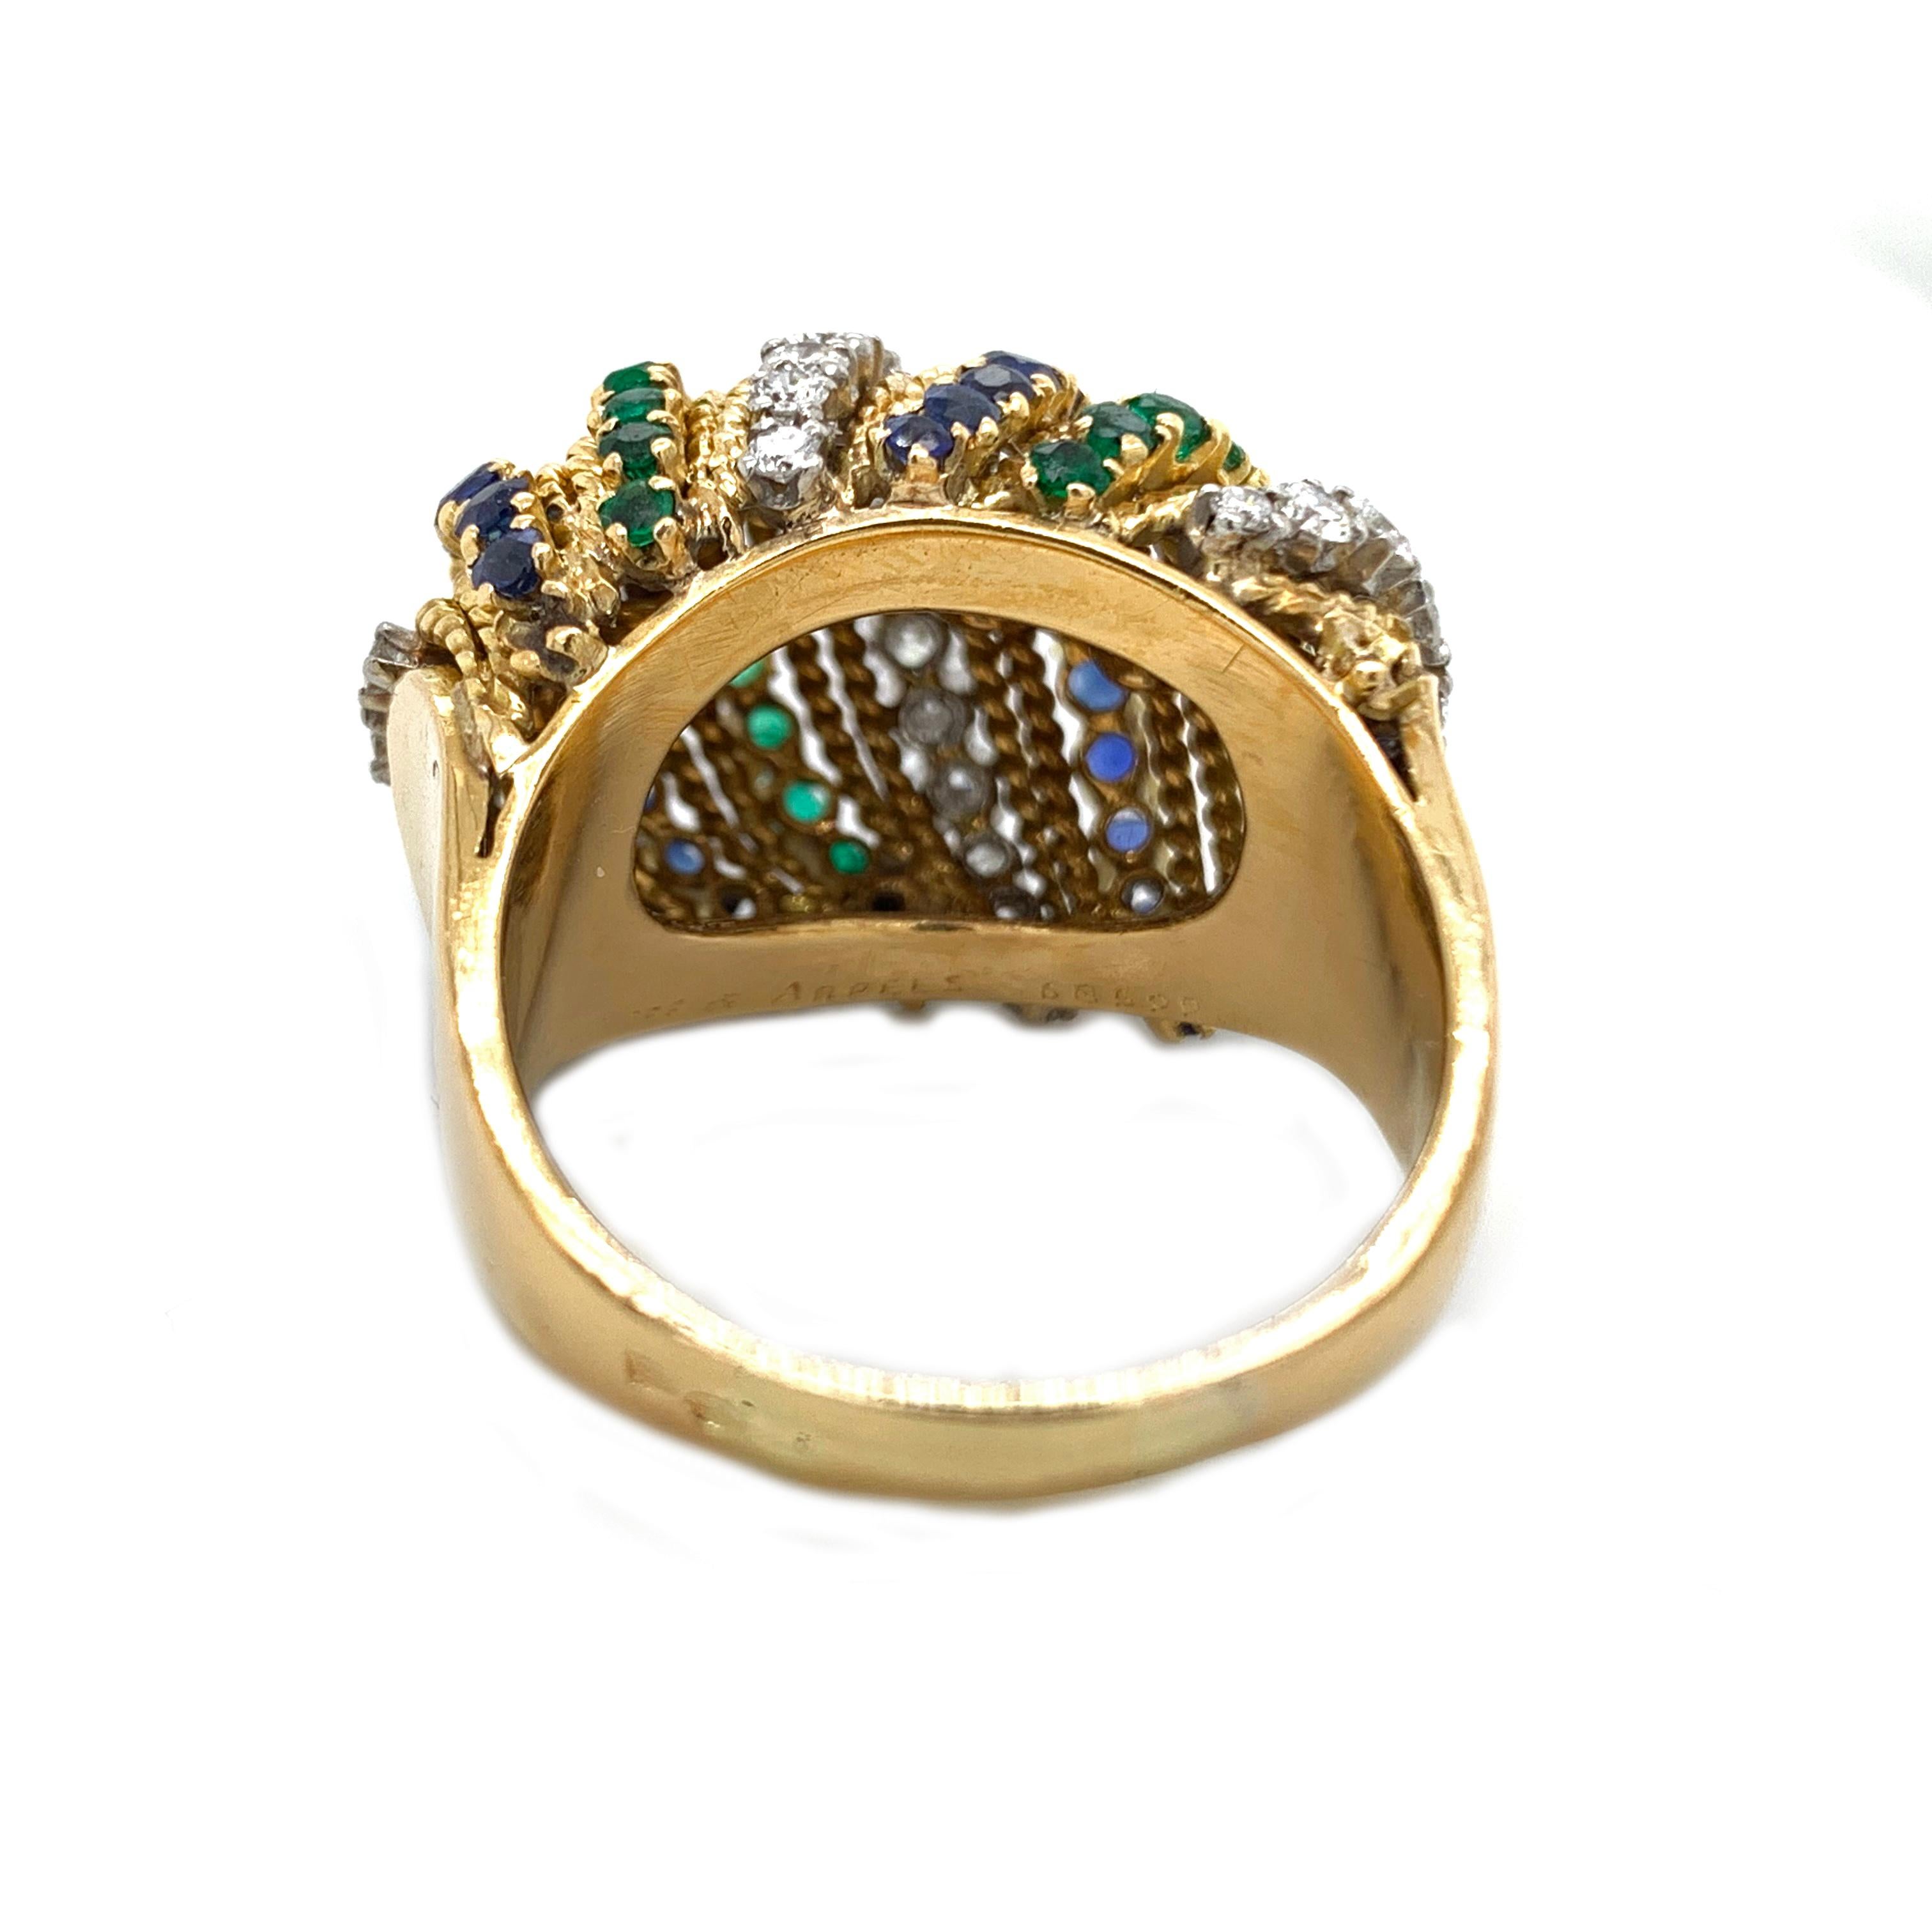 This, beautiful and iconic dome ring from Van Cleef's & Arpels was made in the 1960's it beautifully incorporates Emeralds, Sapphires & Diamonds in a swinging striped pattern. Mounted, in 18kt yellow gold in a US Ring size 9.
Weigh: 14.0g

